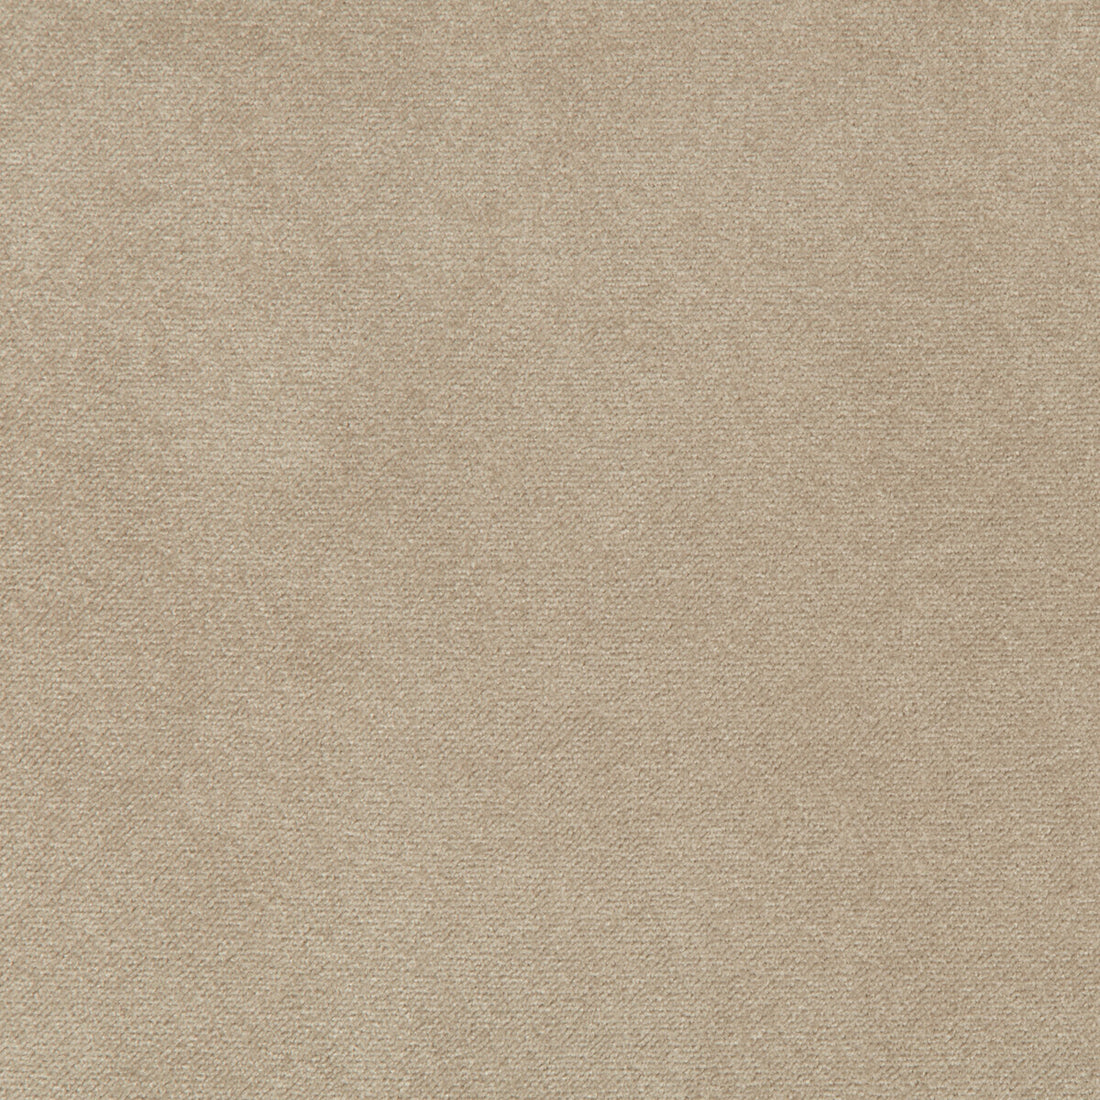 Madison Velvet fabric in porcini color - pattern 35402.16.0 - by Kravet Contract